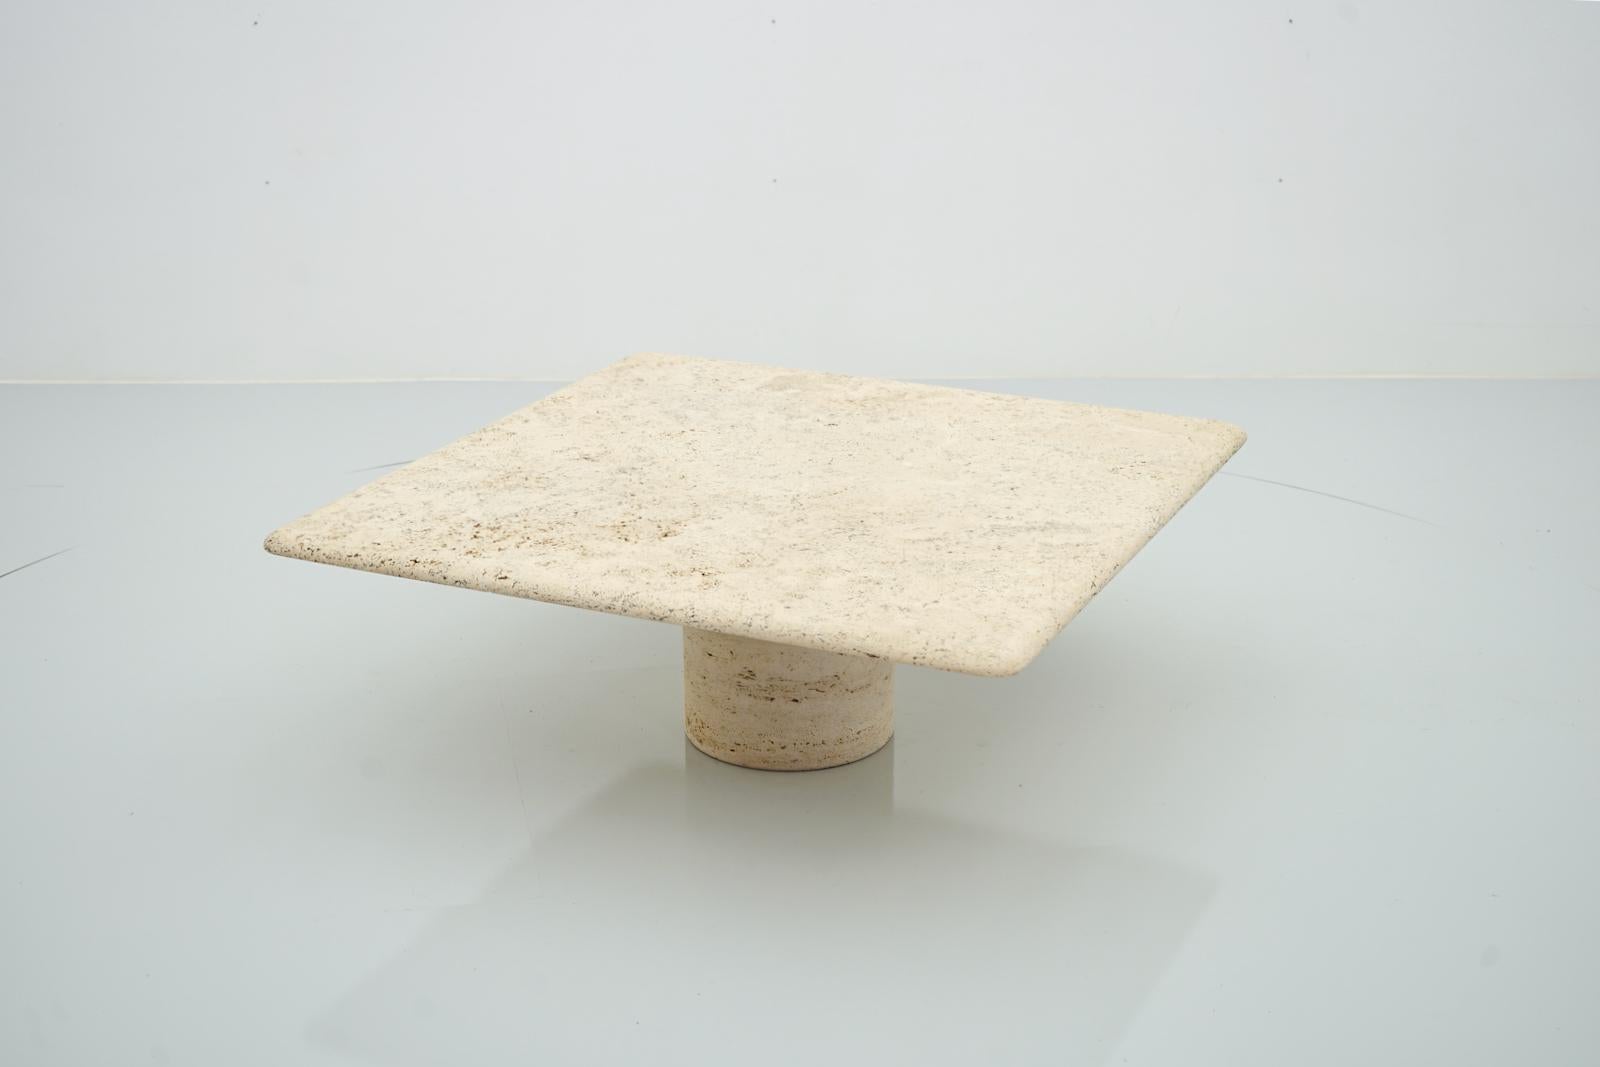 Square Travertine coffee table by Angelo Mangiarotti for Up and Up, Italy 1970s. Beautiful Italian Travertine stone with open pores. 
Very good condition.